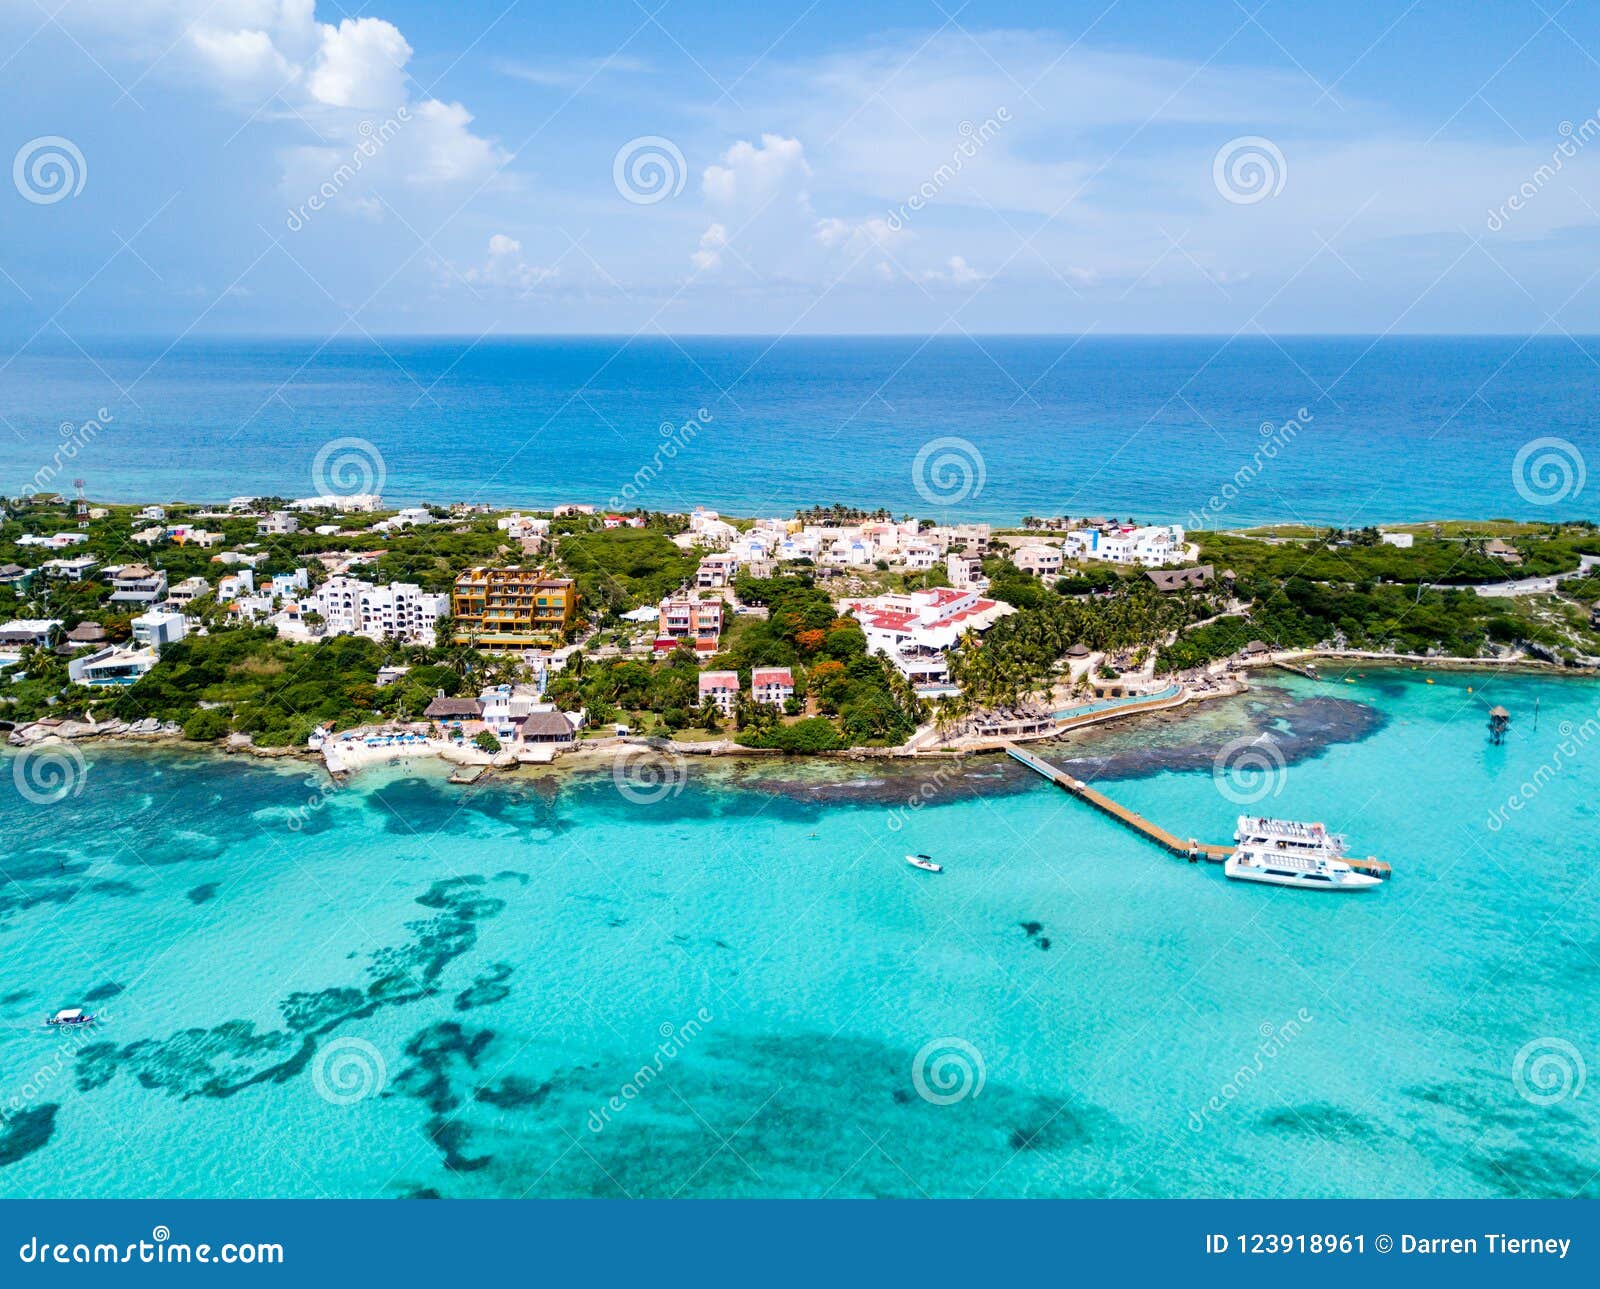 an aerial view of isla mujeres in cancun, mexico